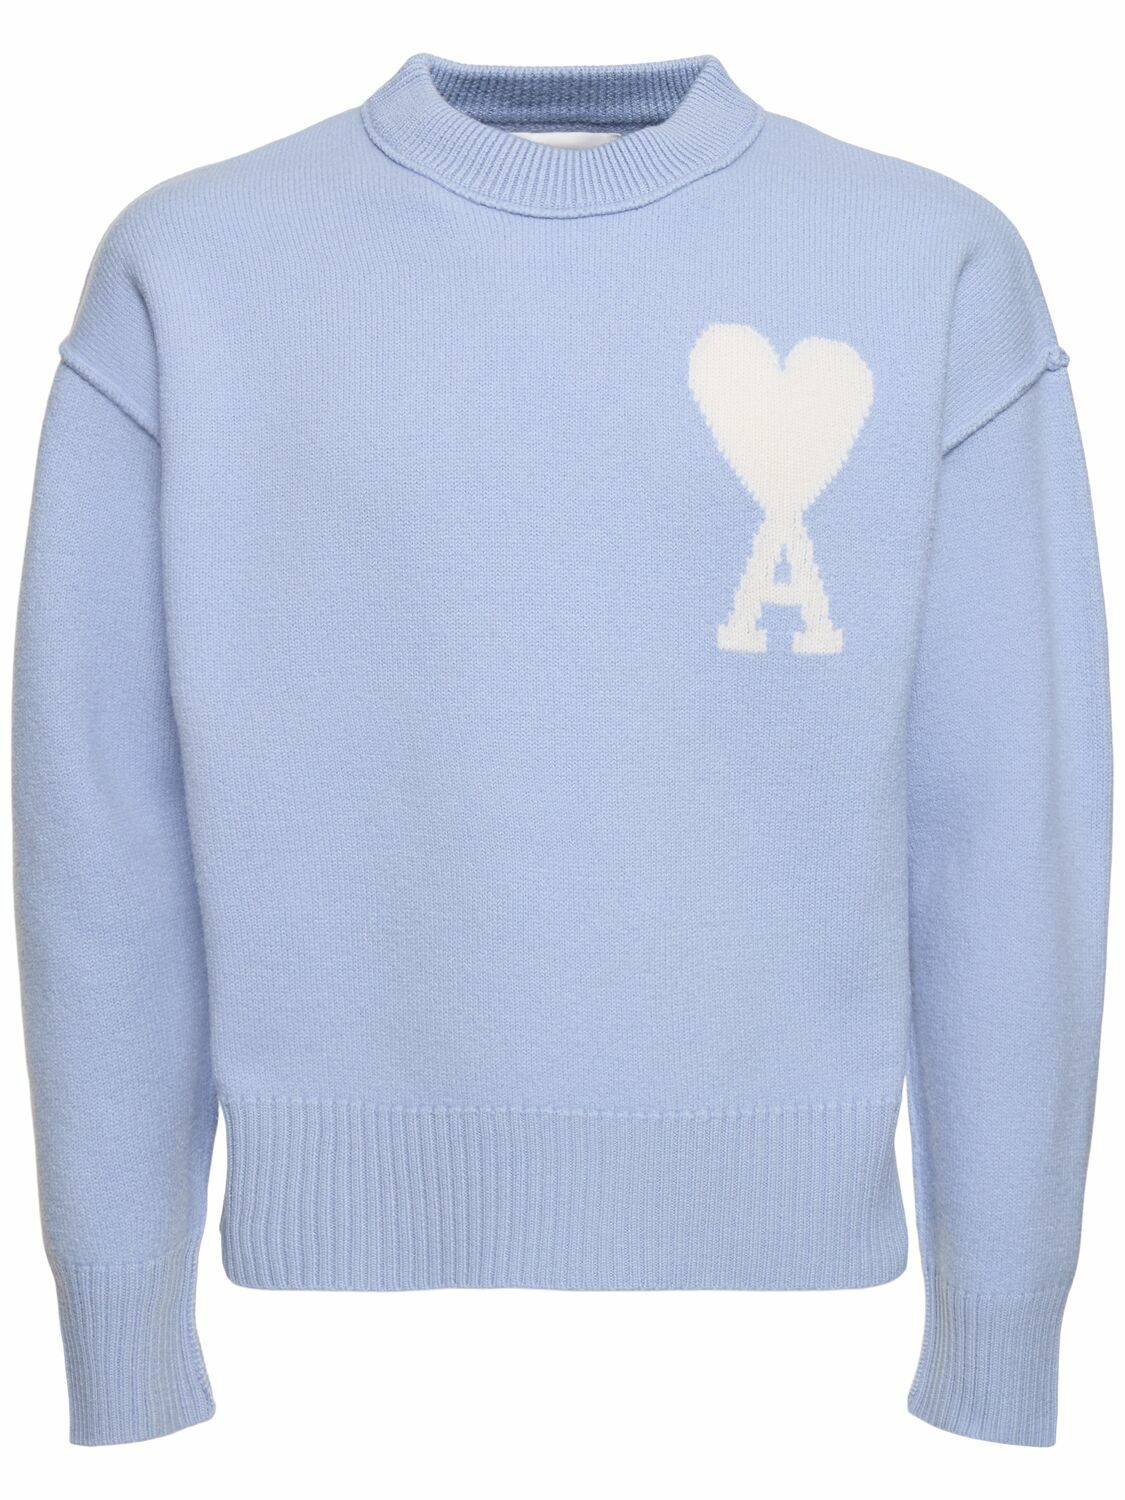 Photo: AMI PARIS - Adc Felted Wool Knit Sweater